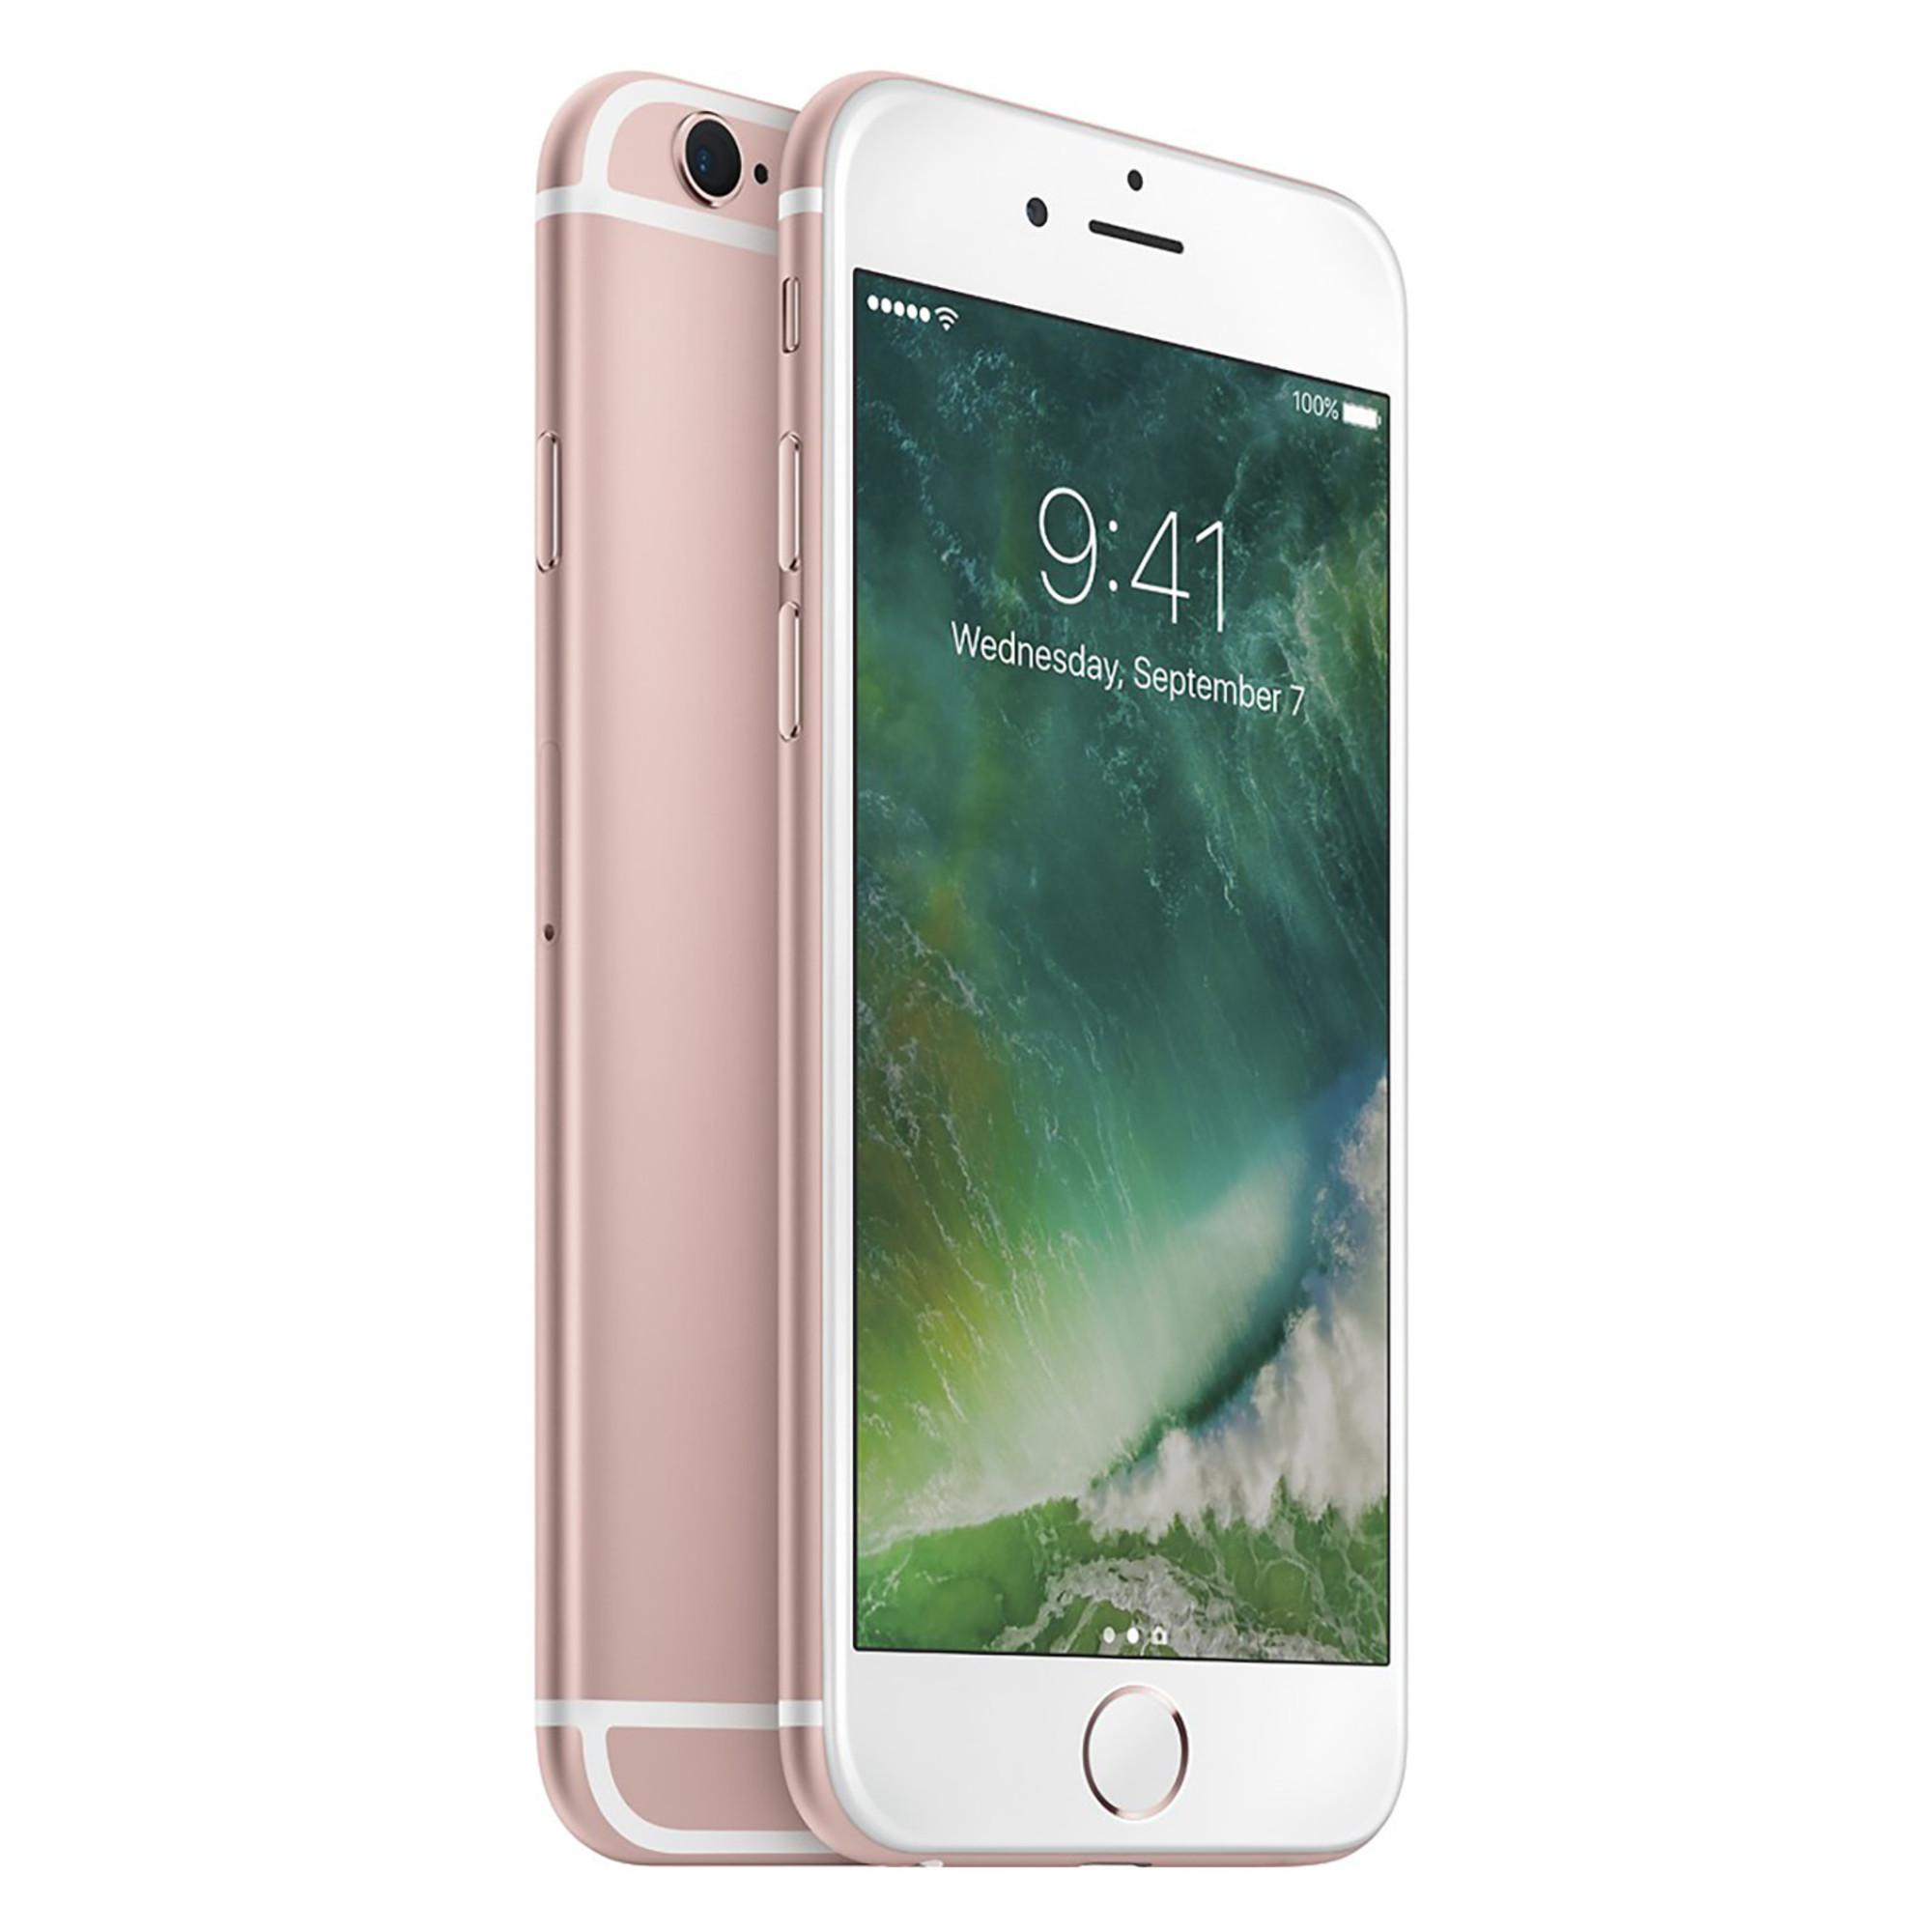 Apple iPhone 6s 32GB GSM Phone - Rose Gold (Used) + WeCare Alcohol Wipes Pack (50 Wipes) - image 1 of 6